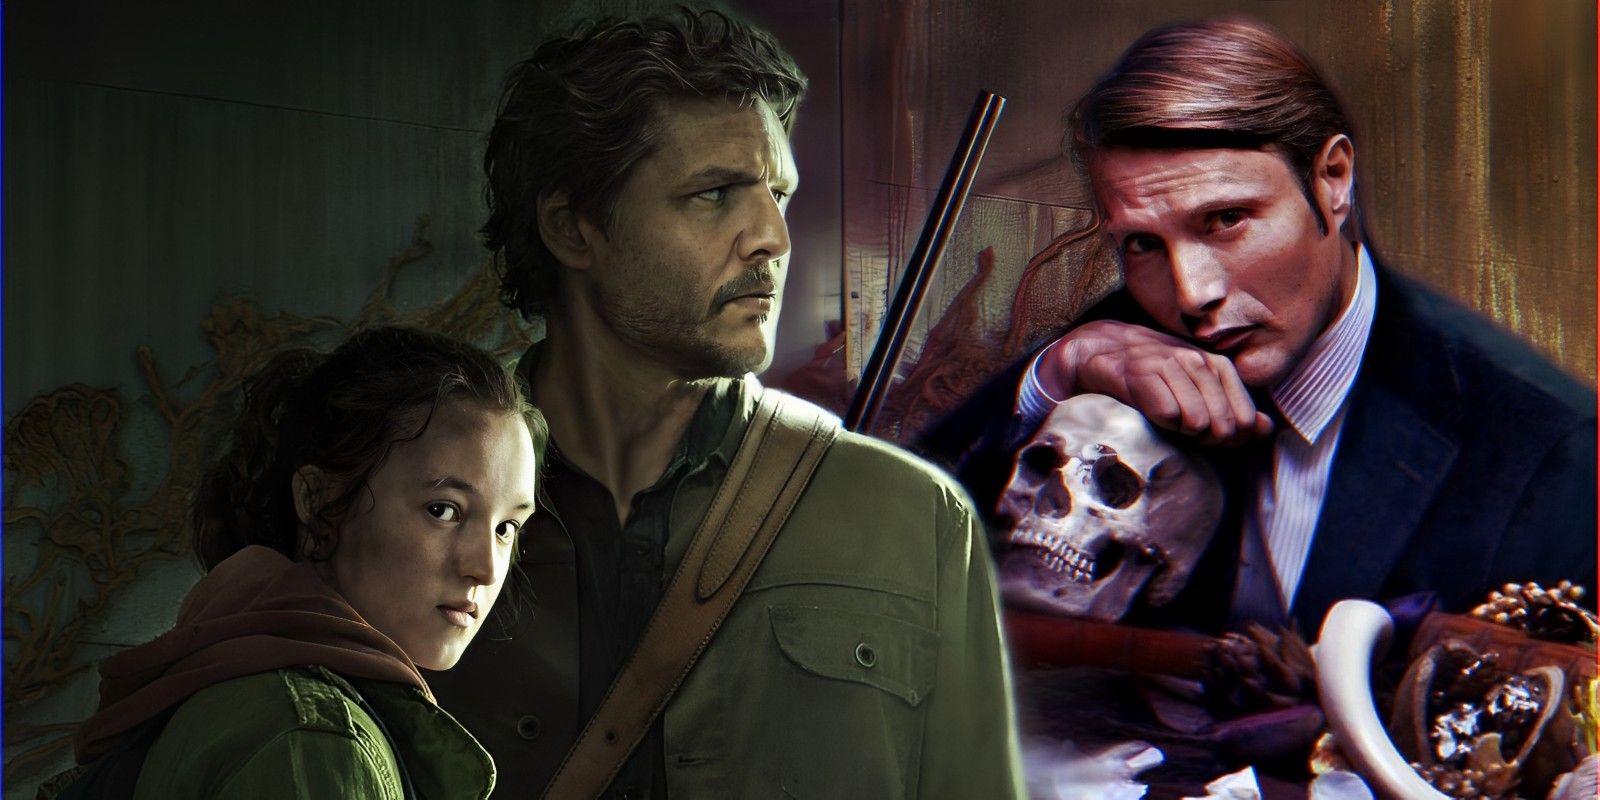 The Last of Us' Ellie and Joel with Hannibal Lecter and skull.